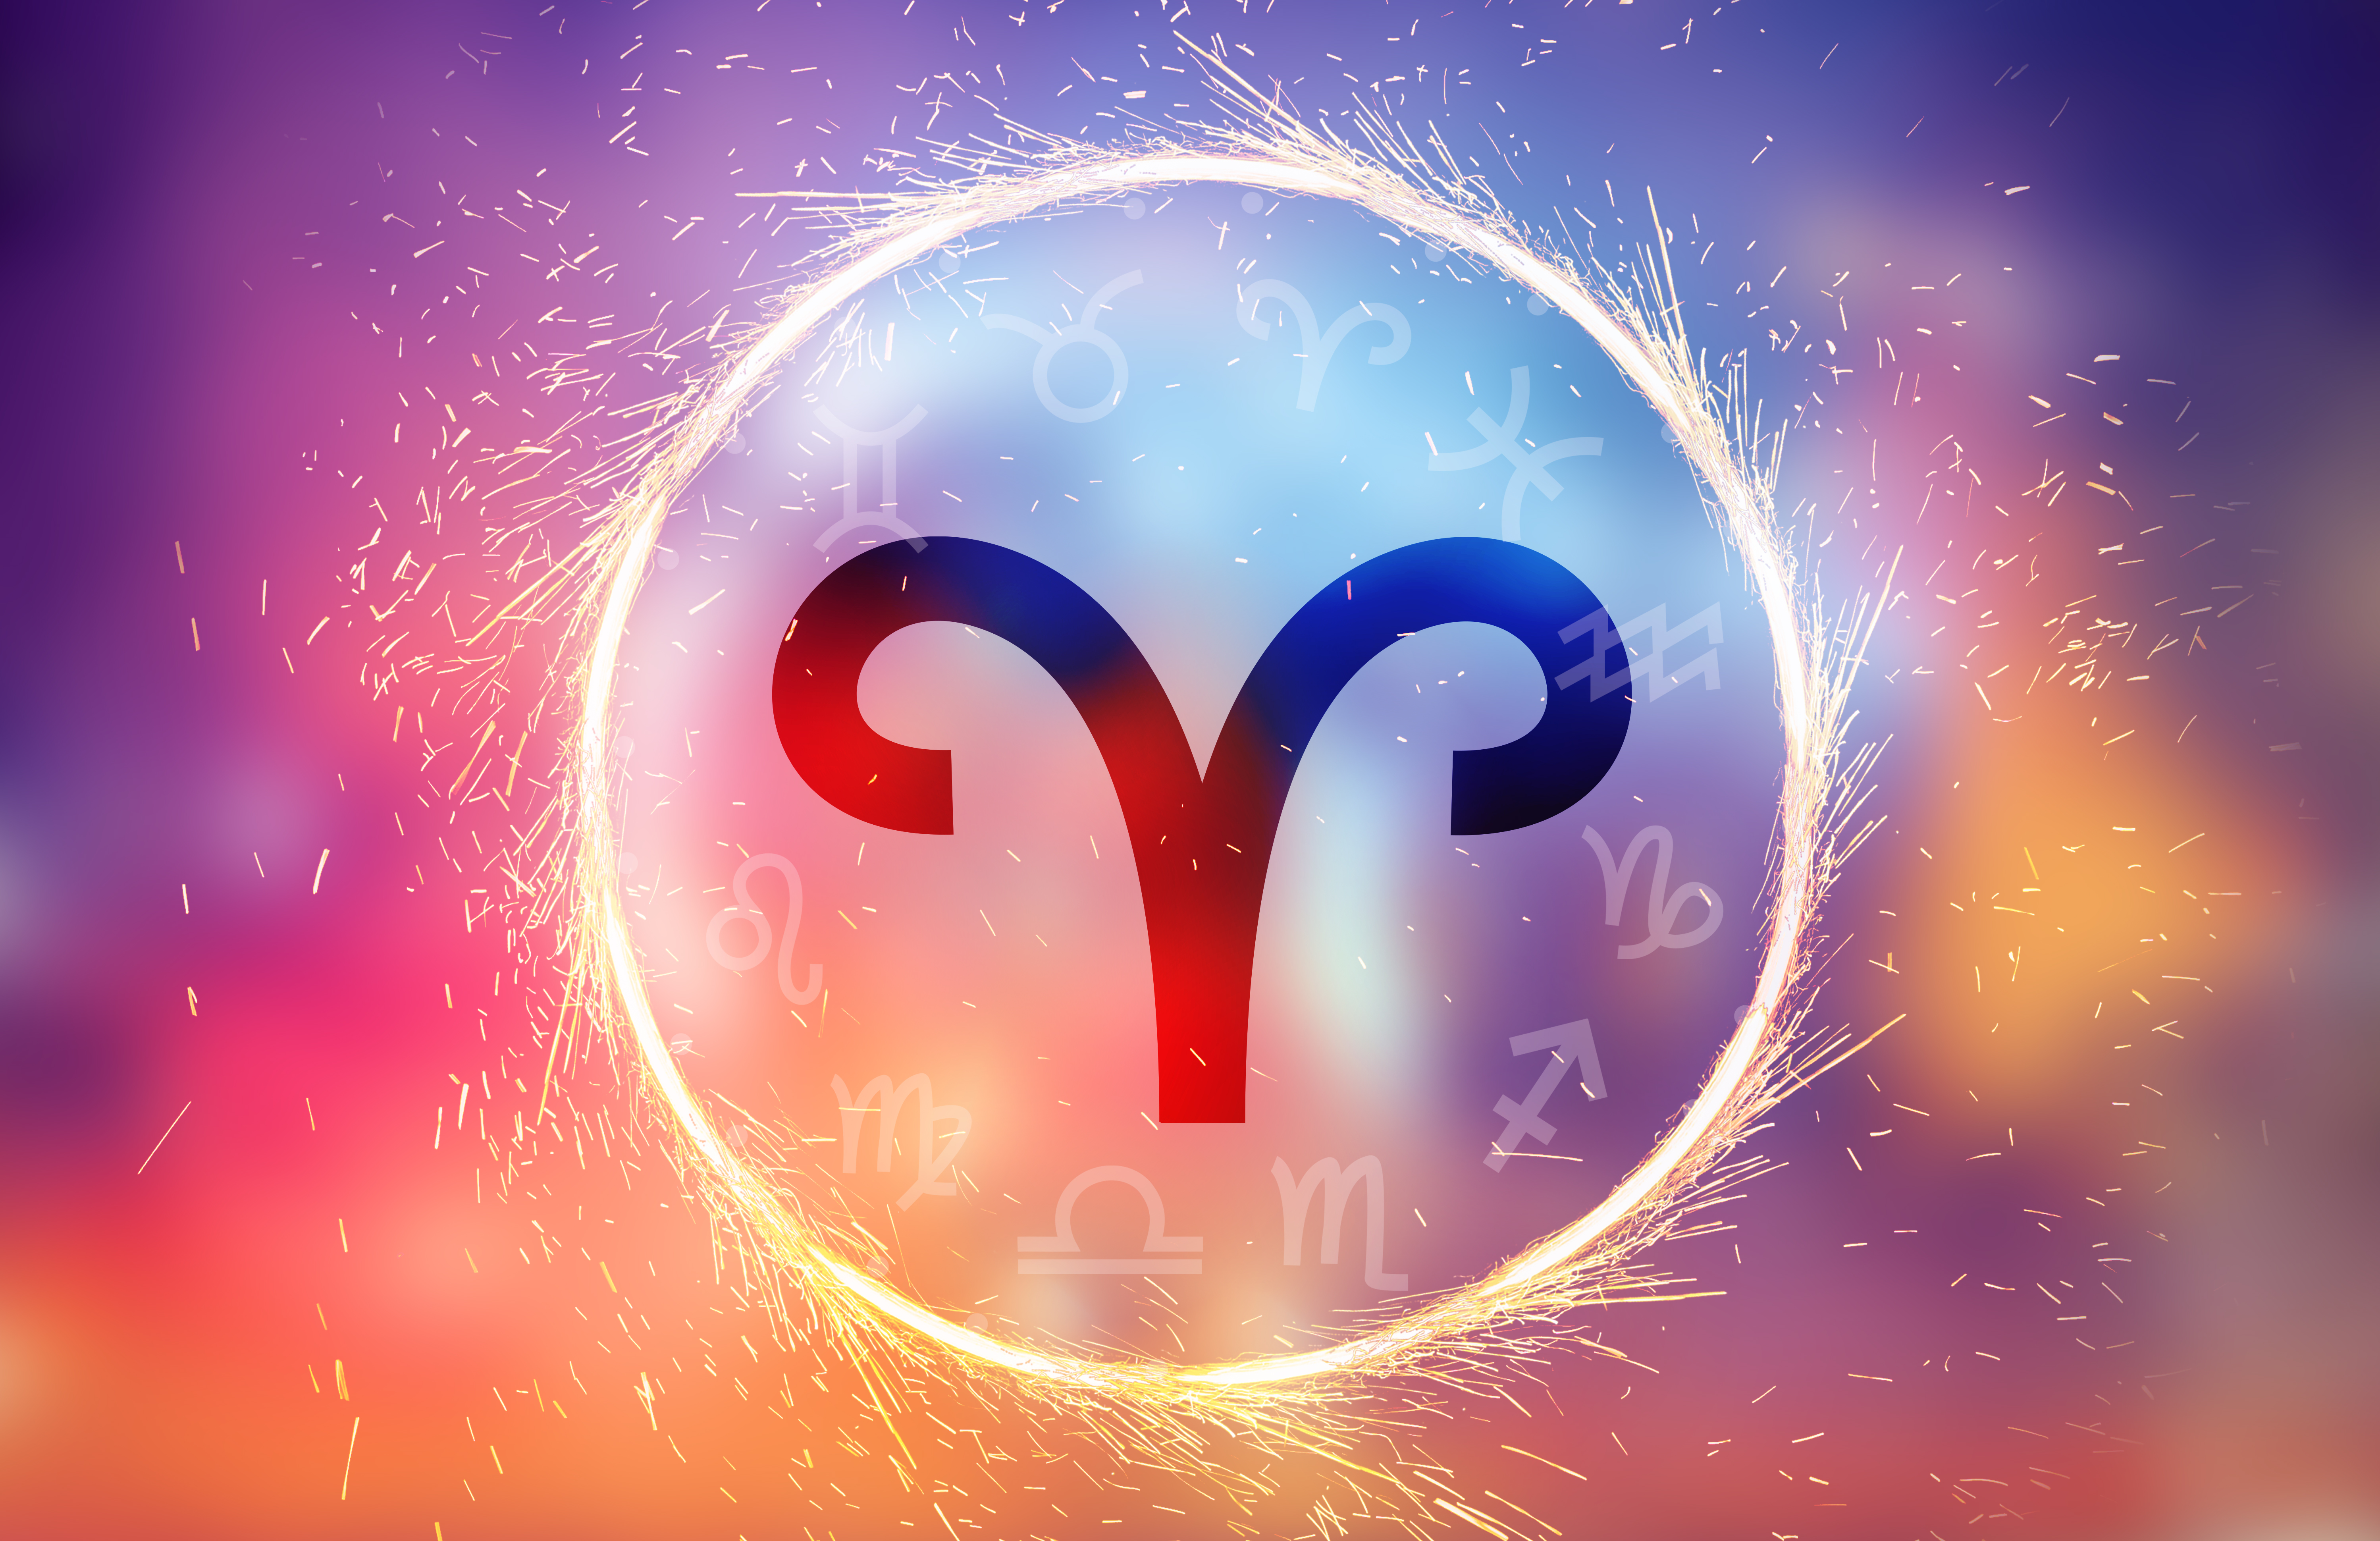 Aries zodiac sign | Source: Getty Images